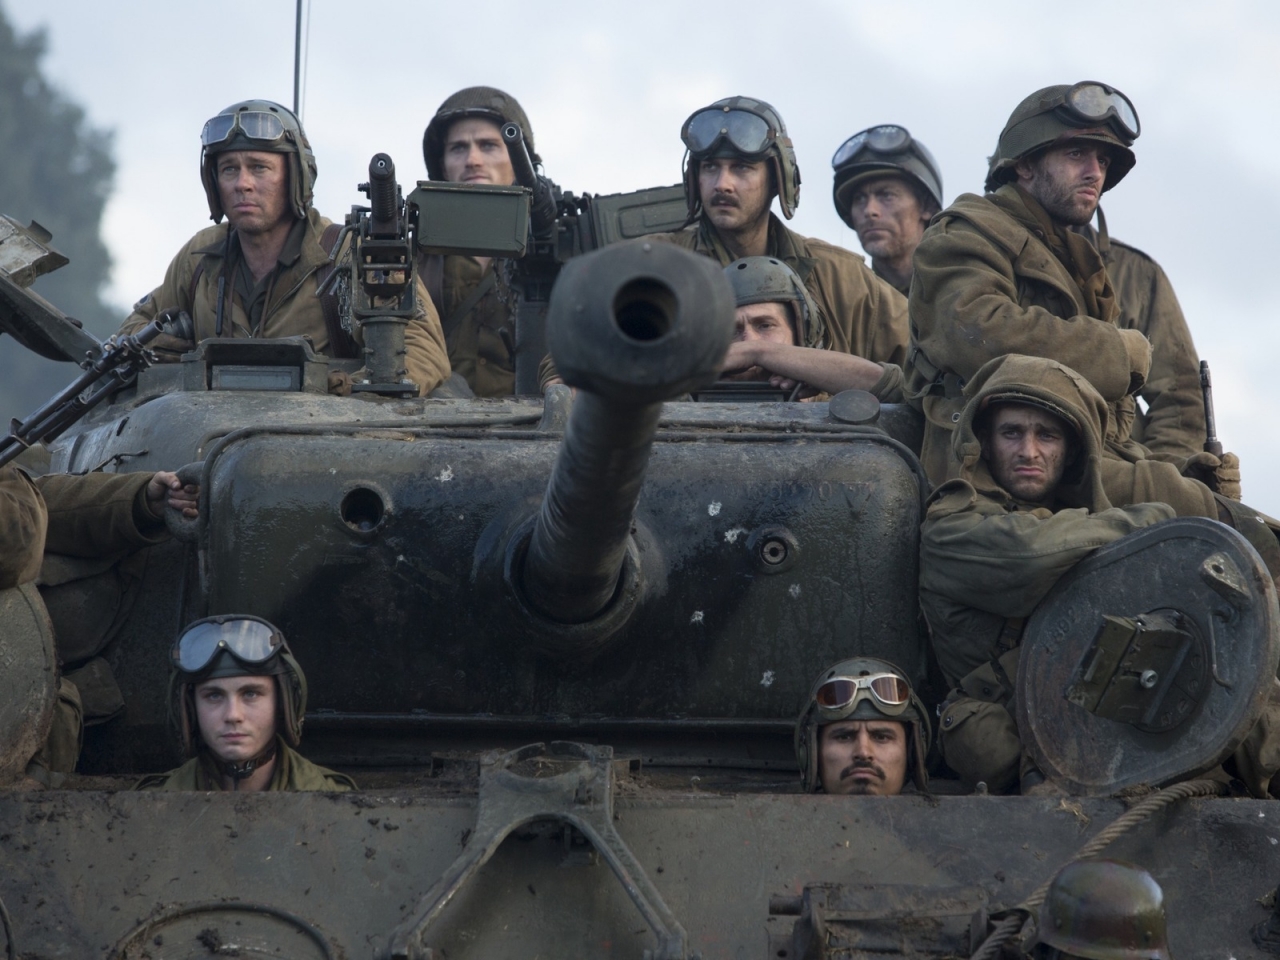 Fury Movie 2014 for 1280 x 960 resolution